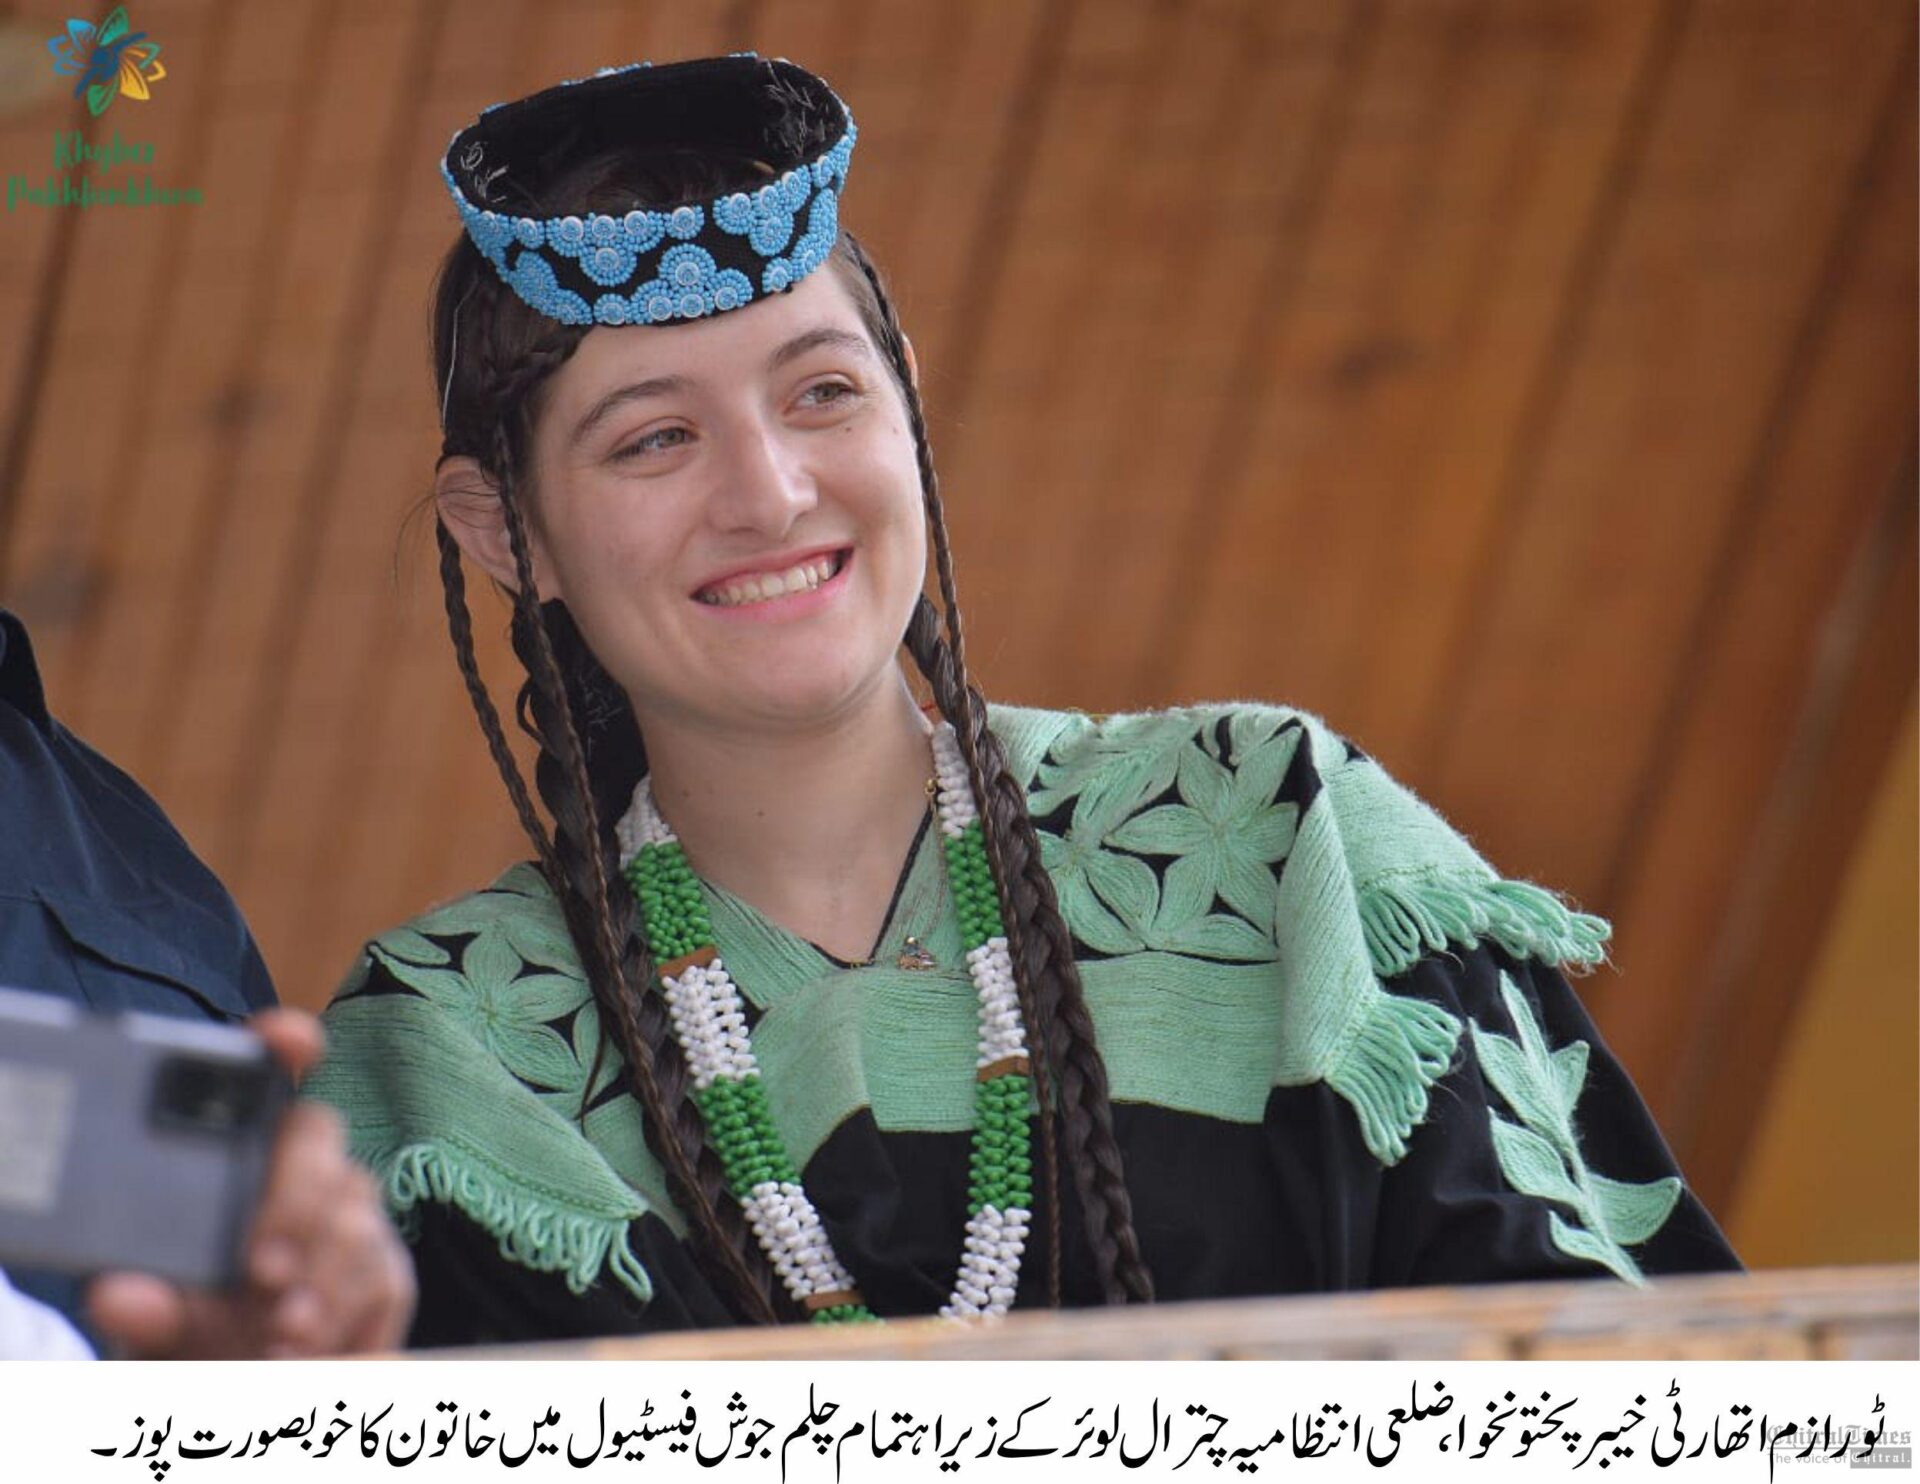 chitraltimes kalash festival chelum jusht concludes bikers attended the event chitral 4